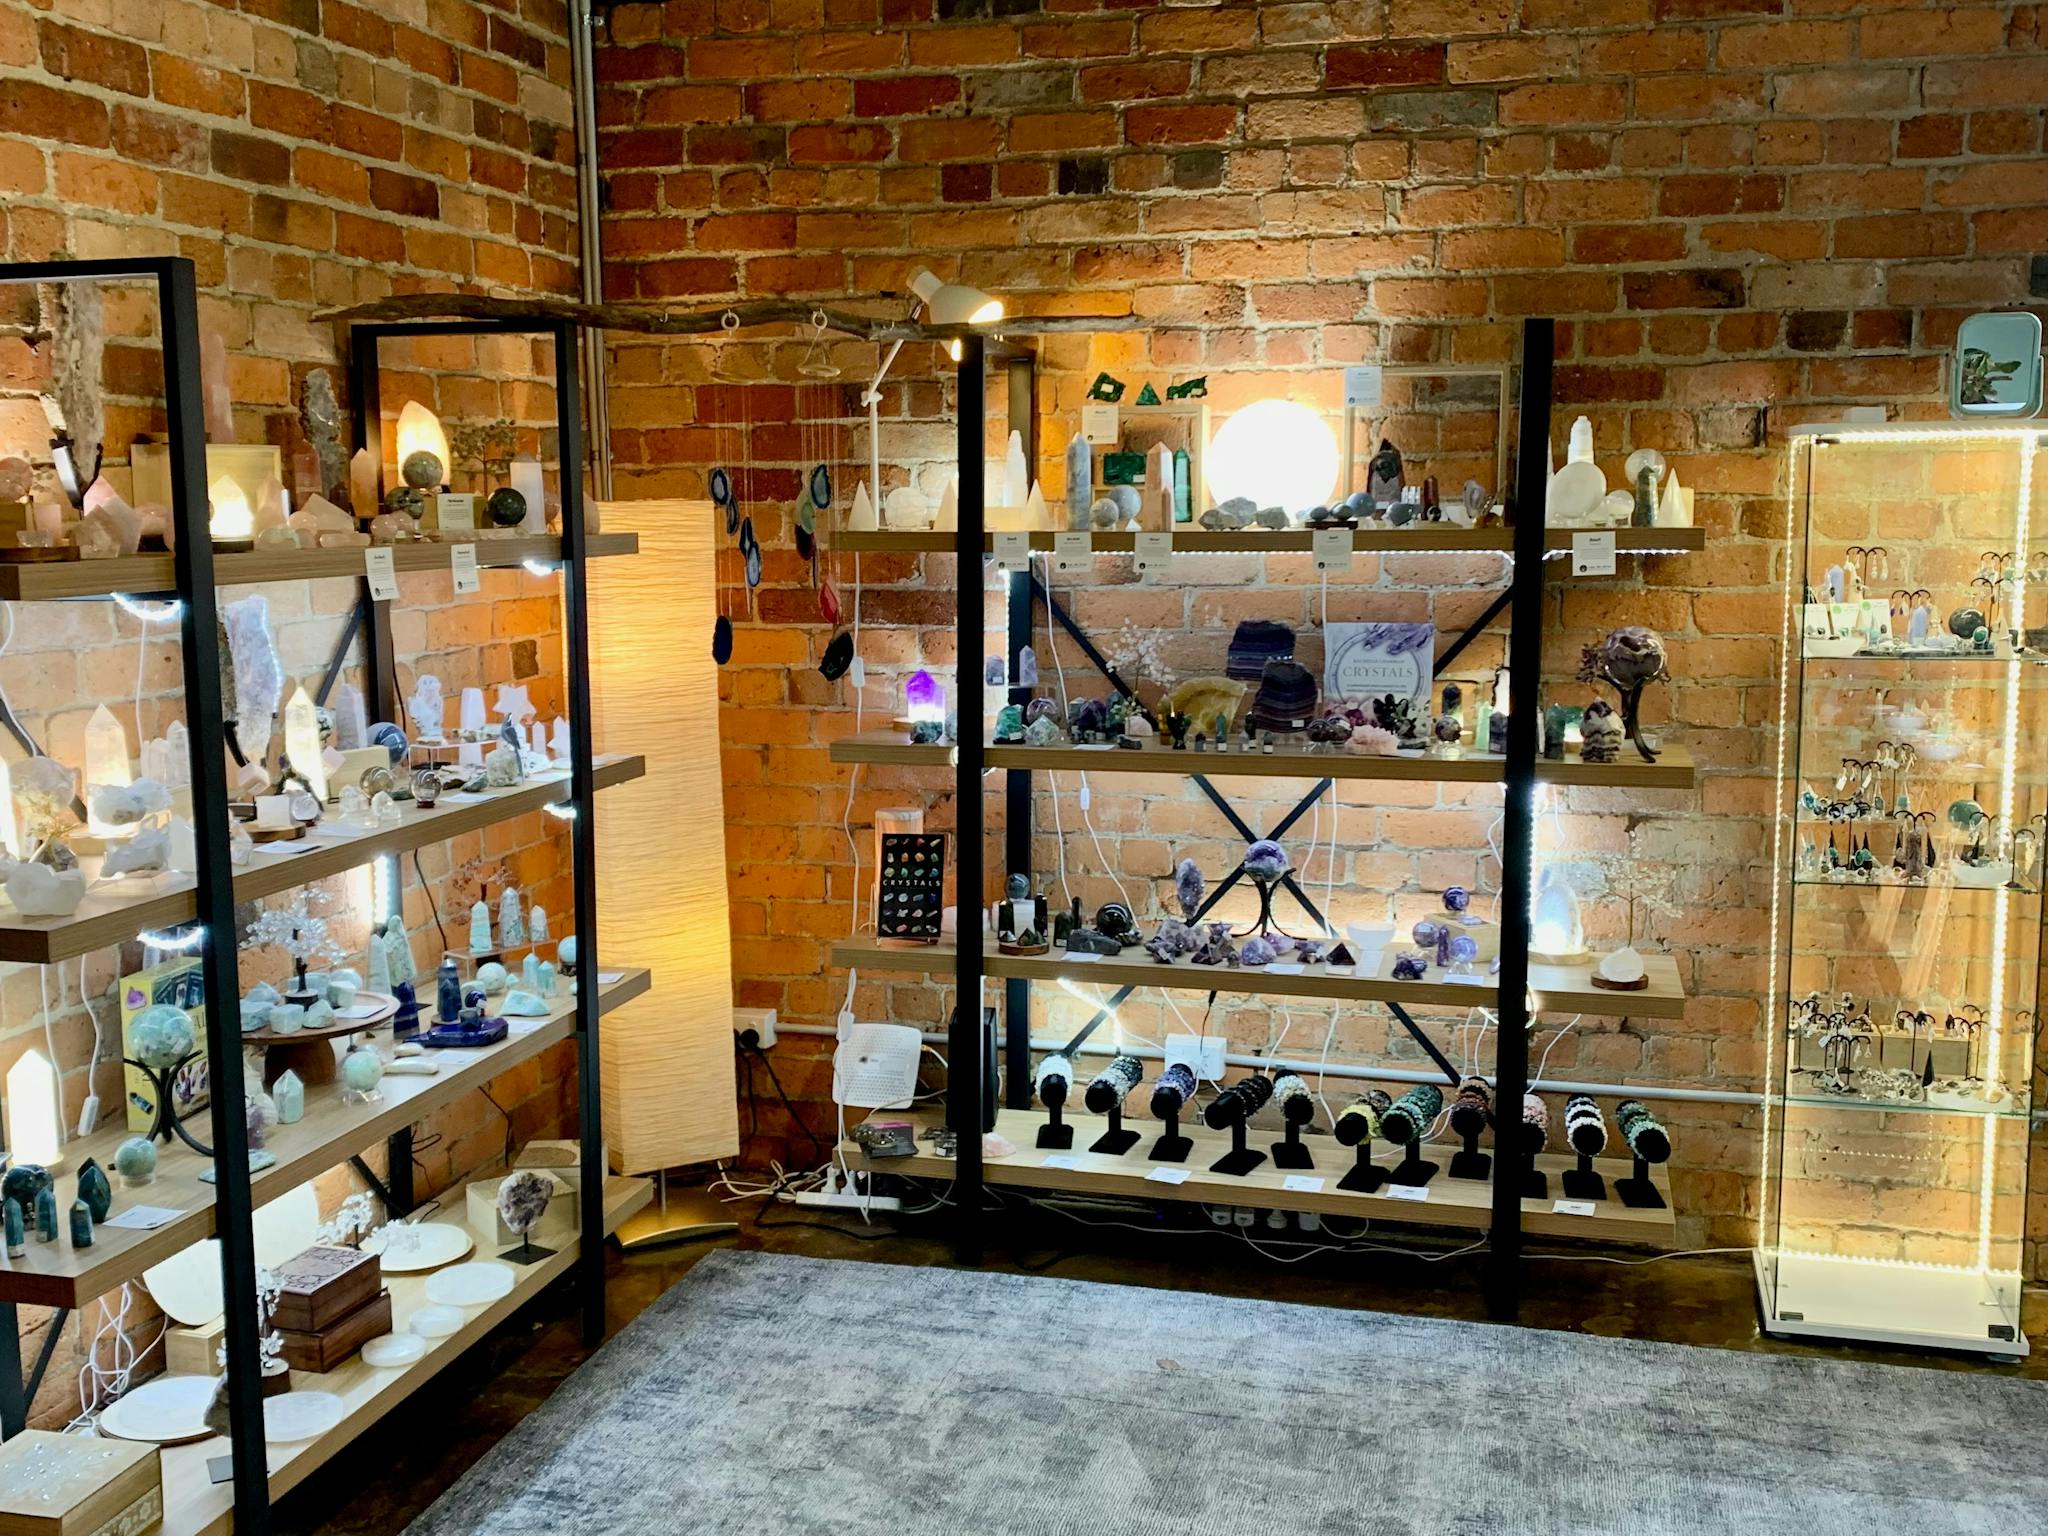 Shelving displaying crystals, lamps and jewellery.